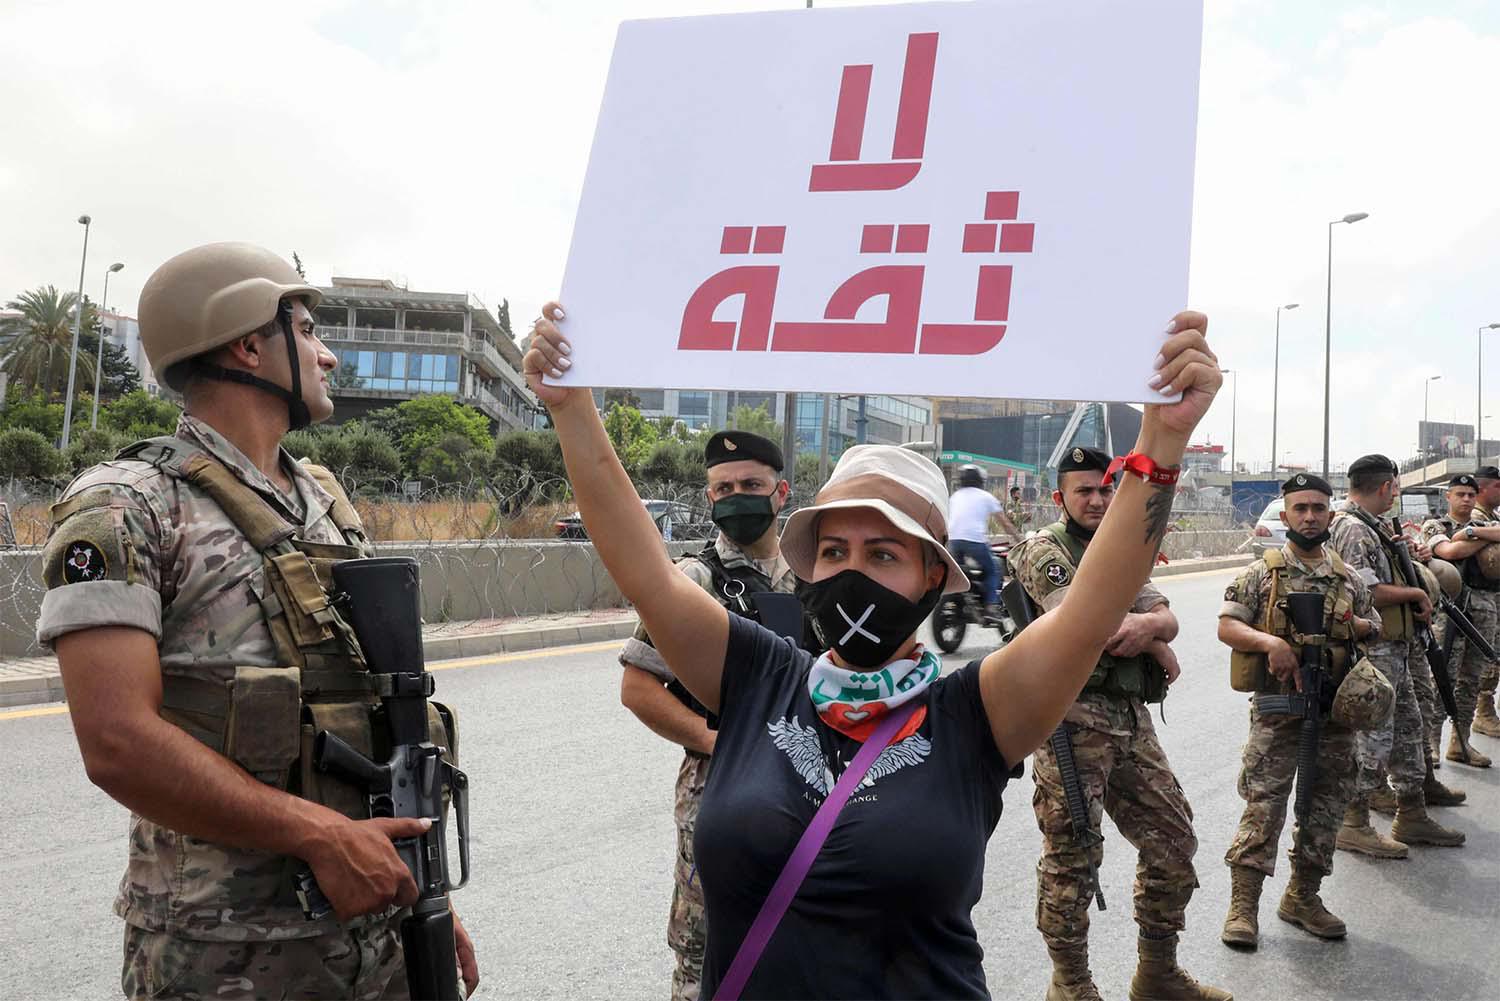 A Lebanese anti-government protester holds a placard reading "No Trust" in front of army soldiers as she takes part in a demonstration near the presidential palace in Beirut